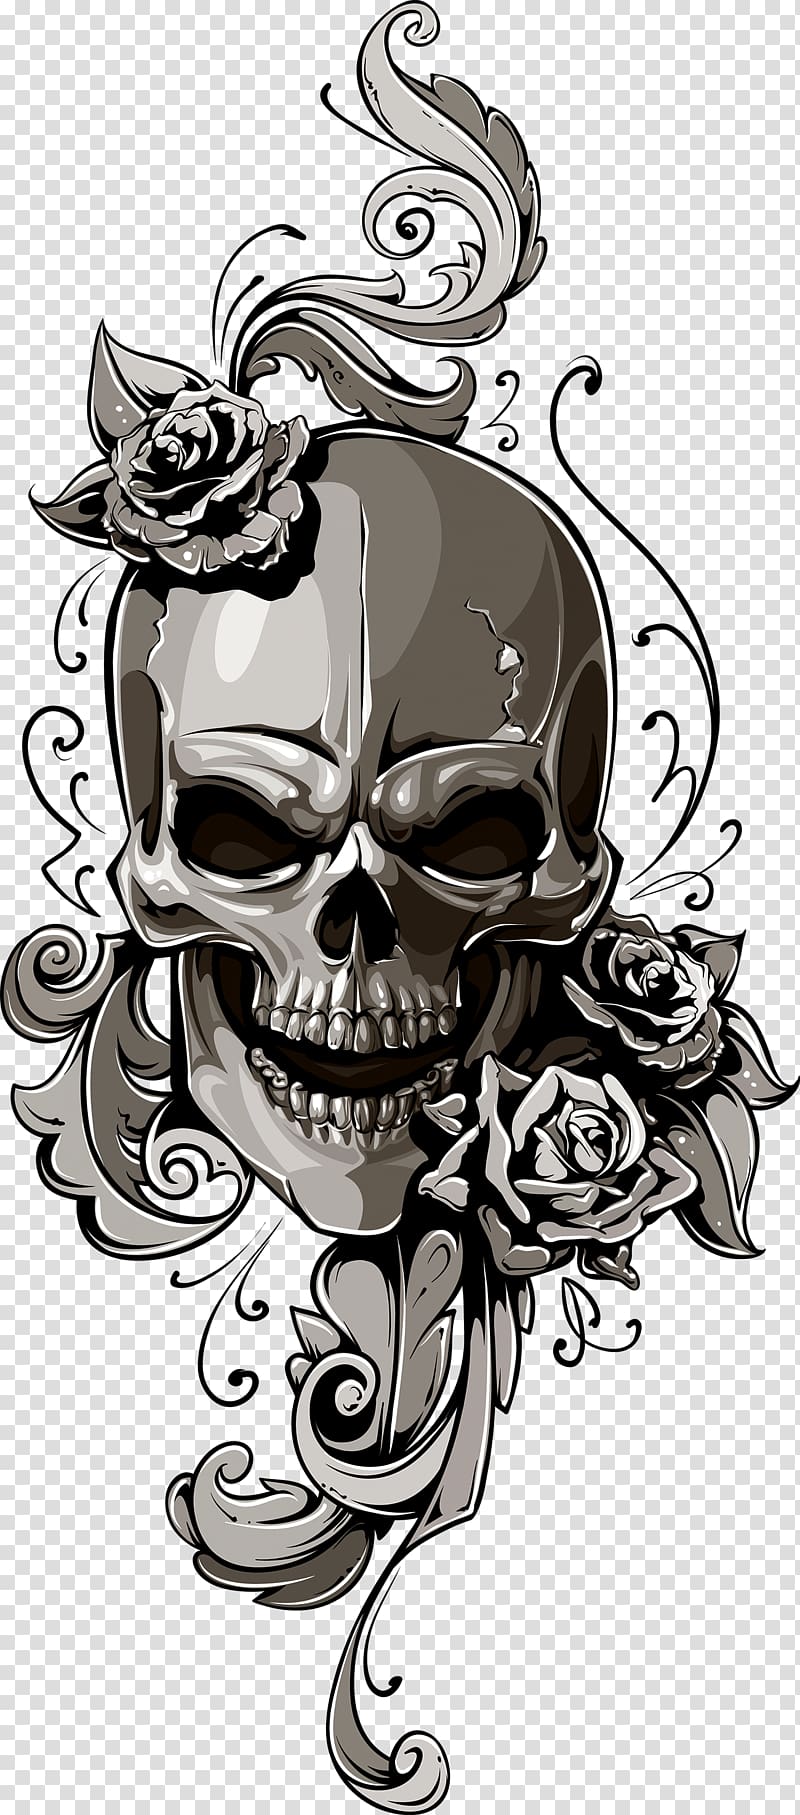 tattoo #skull #design #wings #evil #cool #idea - Skull Tattoo With Wings,  HD Png Download , Transparent Png Image | PNG.ToolXoX.com